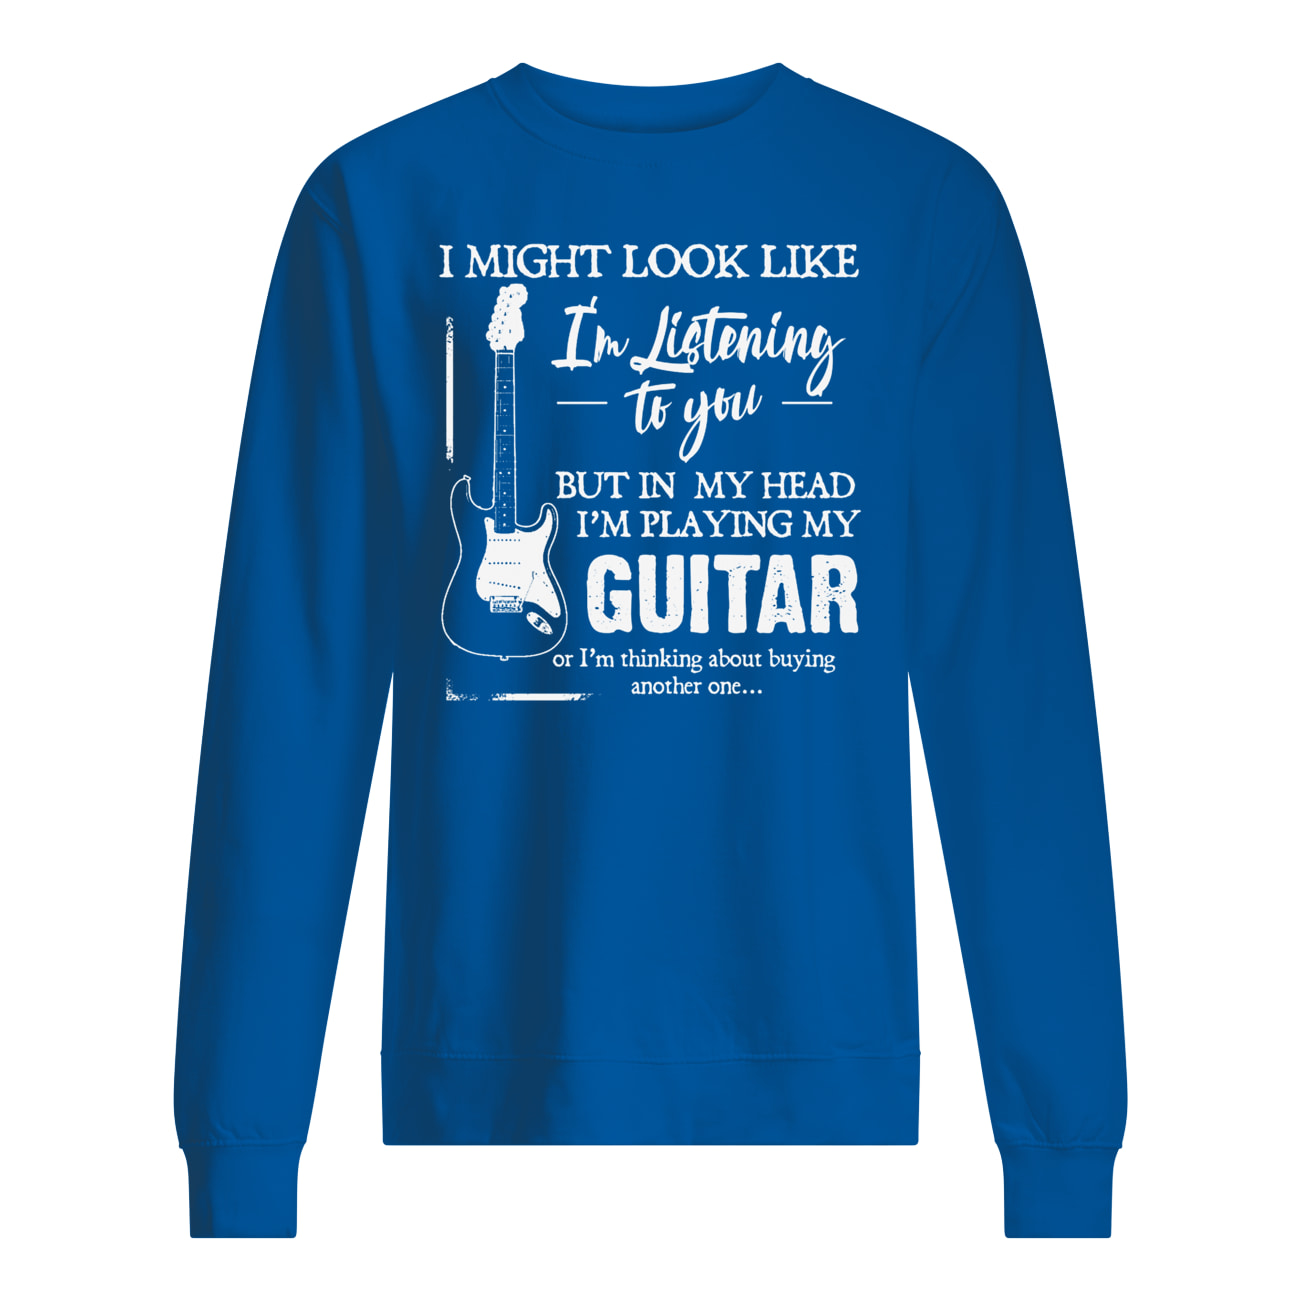 I might look like i'm listening to you but in my head i'm playing my guitar sweatshirt